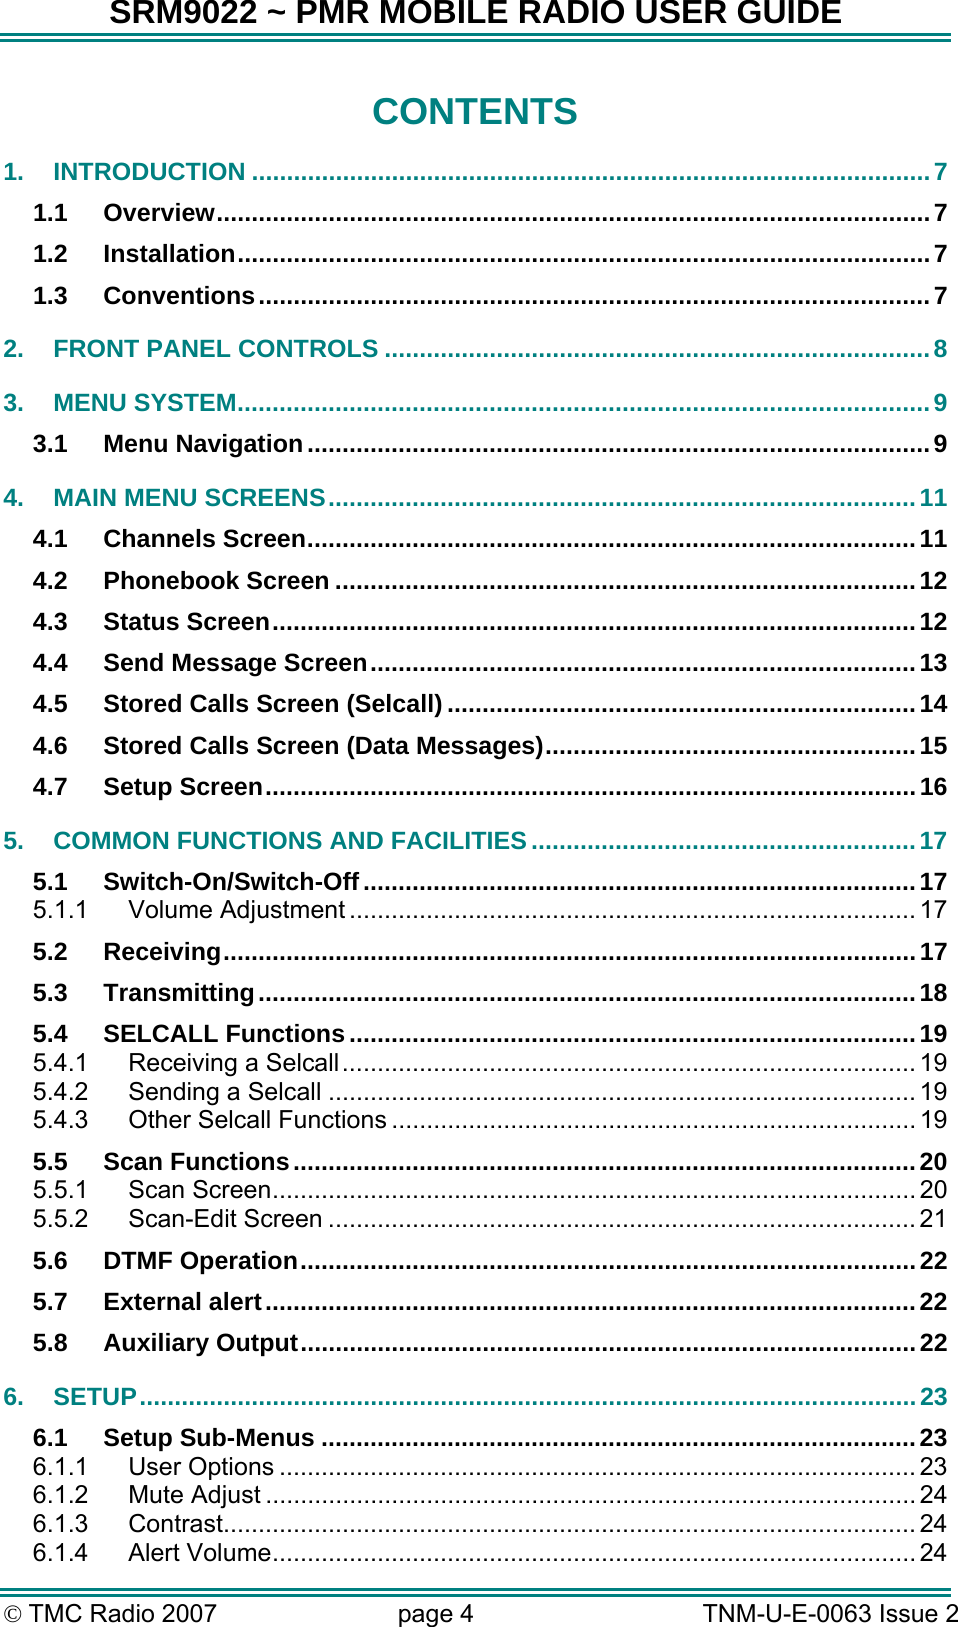 SRM9022 ~ PMR MOBILE RADIO USER GUIDE © TMC Radio 2007  page 4   TNM-U-E-0063 Issue 2 CONTENTS 1. INTRODUCTION .................................................................................................7 1.1 Overview......................................................................................................7 1.2 Installation...................................................................................................7 1.3 Conventions................................................................................................7 2. FRONT PANEL CONTROLS ..............................................................................8 3. MENU SYSTEM...................................................................................................9 3.1 Menu Navigation.........................................................................................9 4. MAIN MENU SCREENS....................................................................................11 4.1 Channels Screen.......................................................................................11 4.2 Phonebook Screen ...................................................................................12 4.3 Status Screen............................................................................................12 4.4 Send Message Screen..............................................................................13 4.5 Stored Calls Screen (Selcall) ...................................................................14 4.6 Stored Calls Screen (Data Messages).....................................................15 4.7 Setup Screen.............................................................................................16 5. COMMON FUNCTIONS AND FACILITIES .......................................................17 5.1 Switch-On/Switch-Off...............................................................................17 5.1.1 Volume Adjustment ................................................................................. 17 5.2 Receiving...................................................................................................17 5.3 Transmitting..............................................................................................18 5.4 SELCALL Functions.................................................................................19 5.4.1 Receiving a Selcall.................................................................................. 19 5.4.2 Sending a Selcall .................................................................................... 19 5.4.3 Other Selcall Functions ........................................................................... 19 5.5 Scan Functions.........................................................................................20 5.5.1 Scan Screen............................................................................................ 20 5.5.2 Scan-Edit Screen .................................................................................... 21 5.6 DTMF Operation........................................................................................22 5.7 External alert.............................................................................................22 5.8 Auxiliary Output........................................................................................22 6. SETUP...............................................................................................................23 6.1 Setup Sub-Menus .....................................................................................23 6.1.1 User Options ........................................................................................... 23 6.1.2 Mute Adjust ............................................................................................. 24 6.1.3 Contrast................................................................................................... 24 6.1.4 Alert Volume............................................................................................ 24 